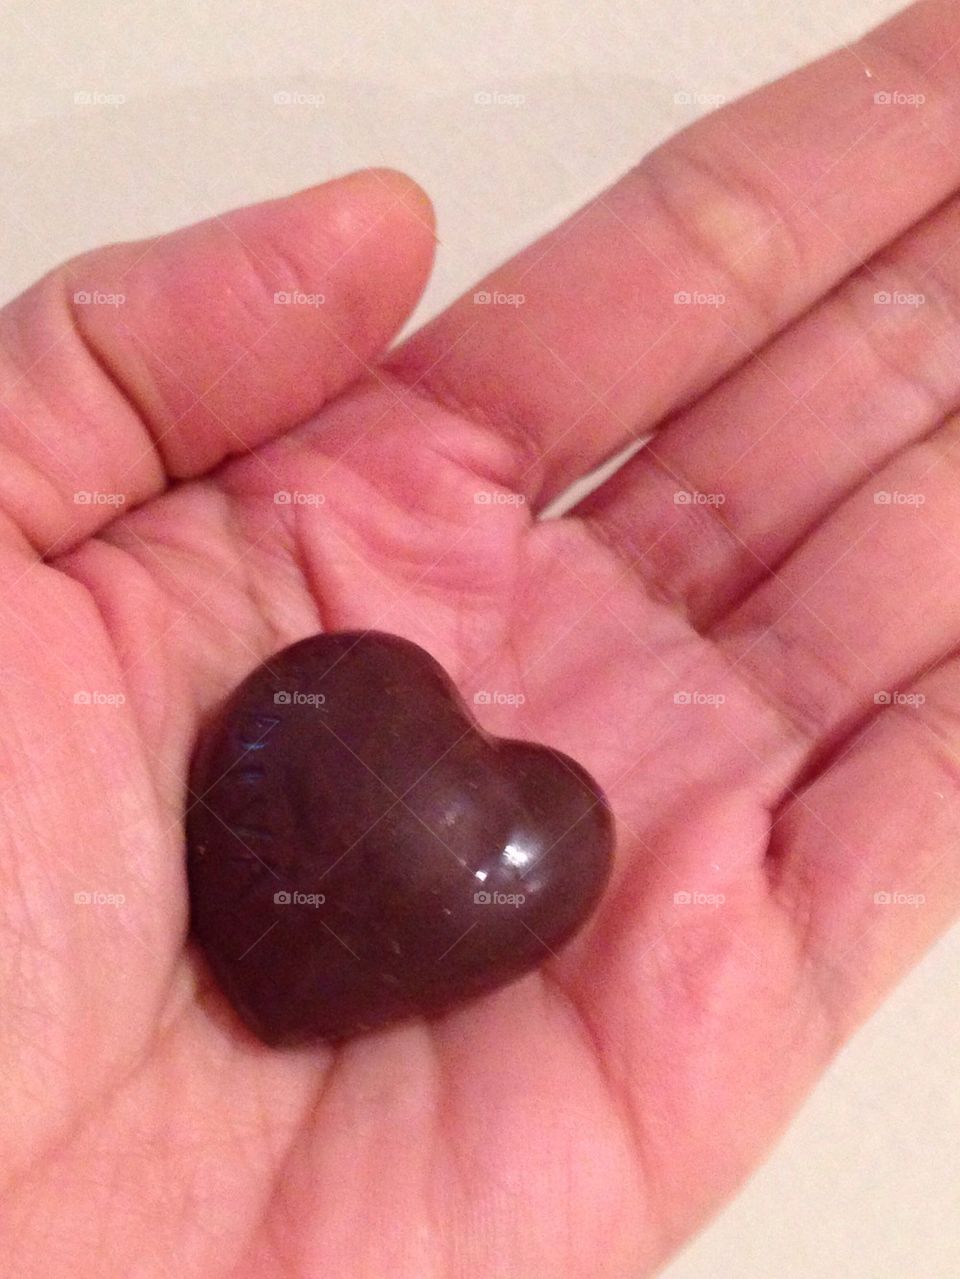 Heart Chocolate for Valentine